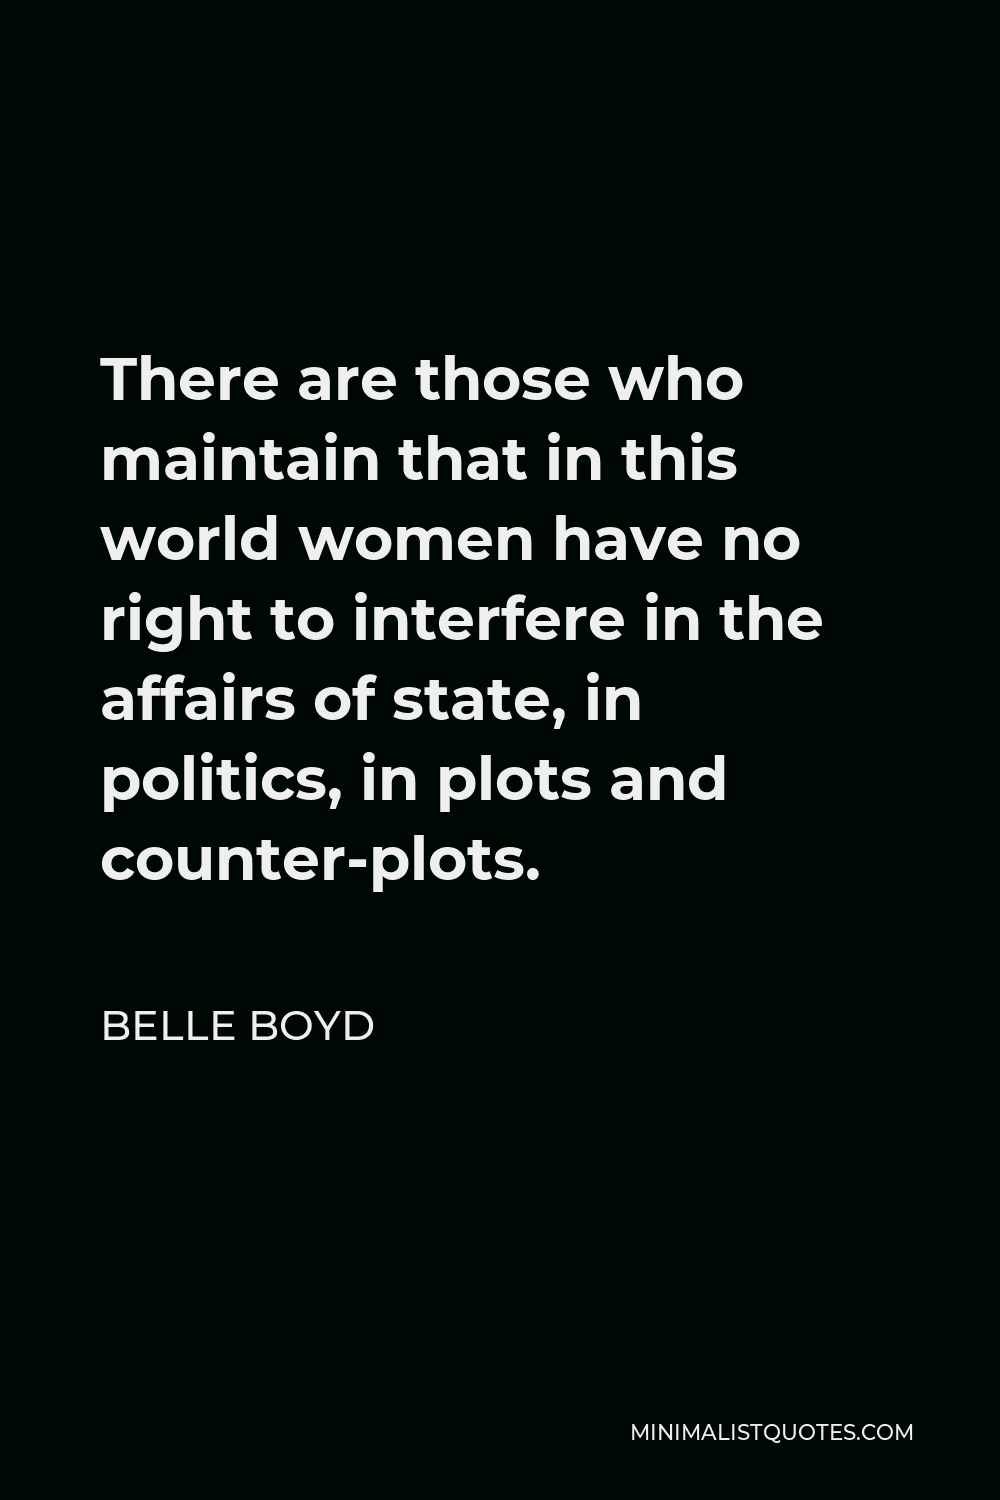 Belle Boyd Quote - There are those who maintain that in this world women have no right to interfere in the affairs of state, in politics, in plots and counter-plots.